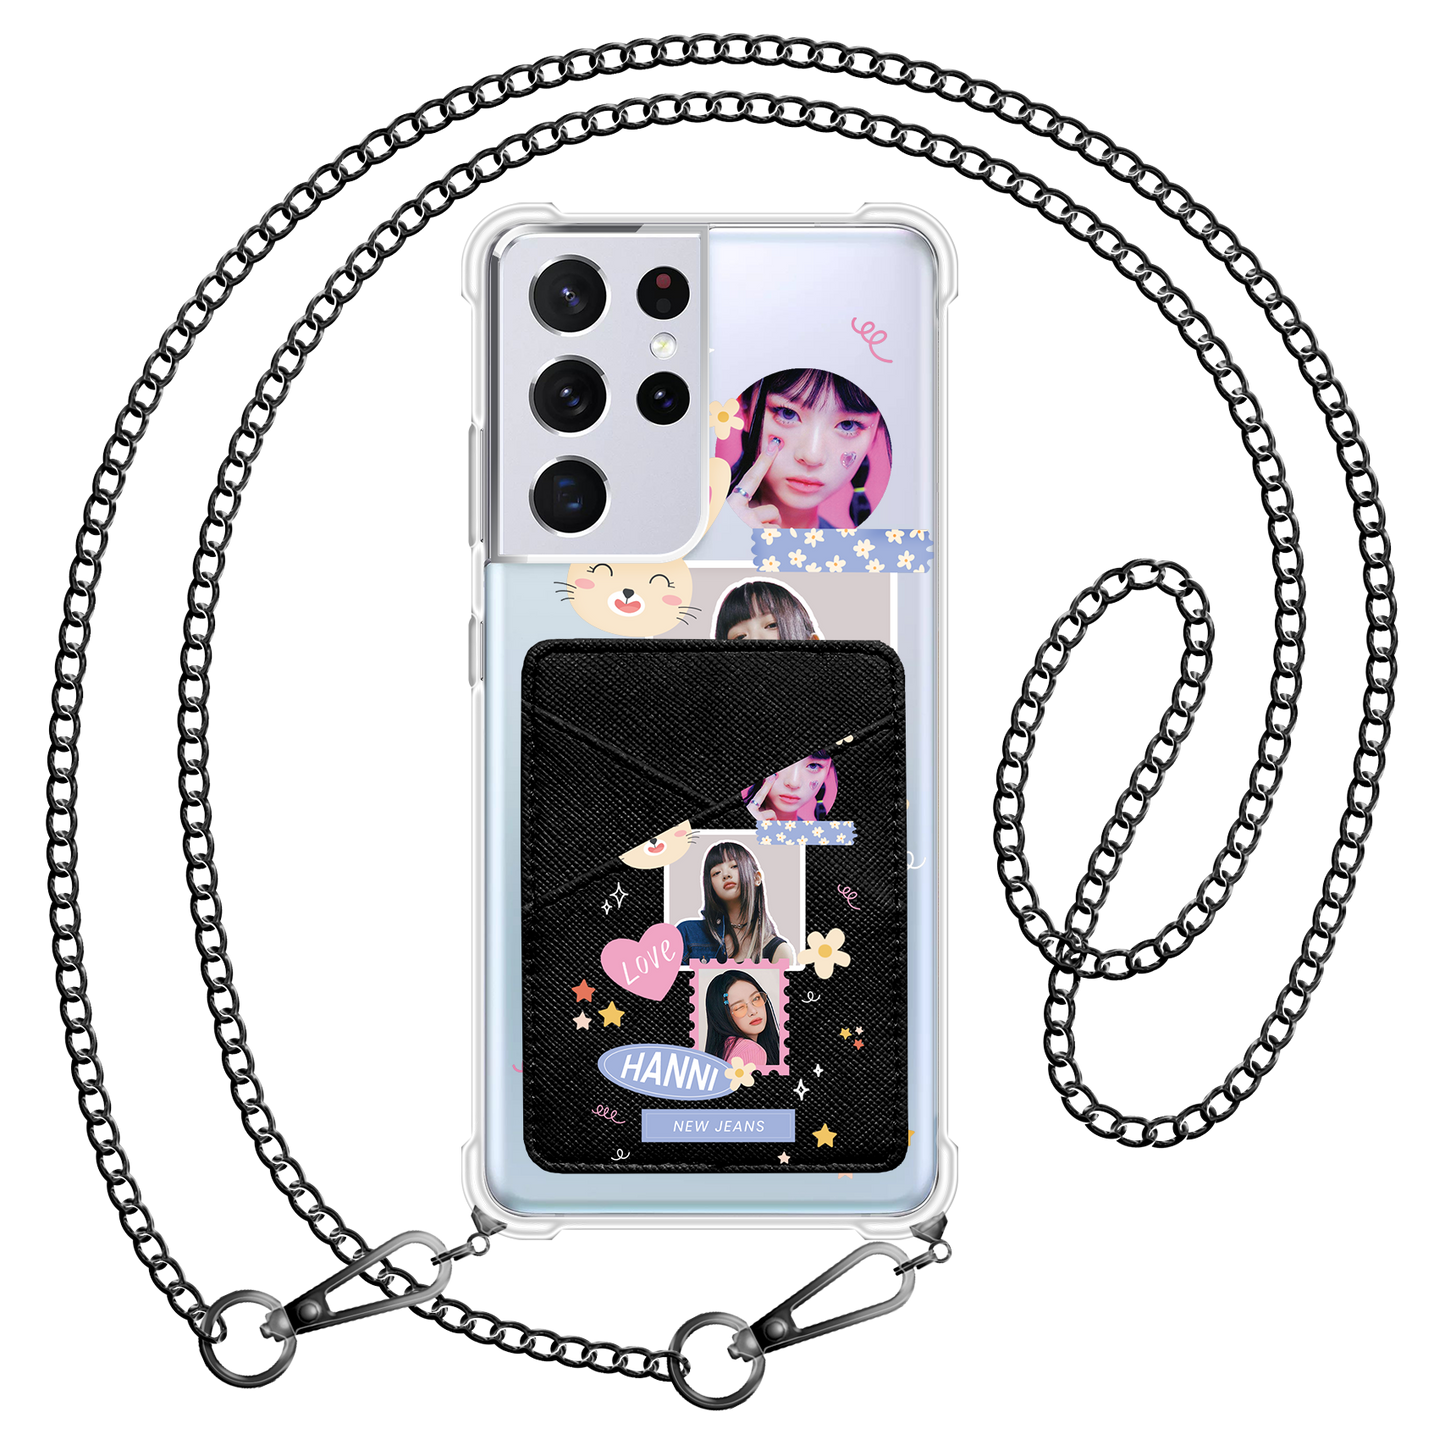 Android Phone Wallet Case - Face Grid Frame